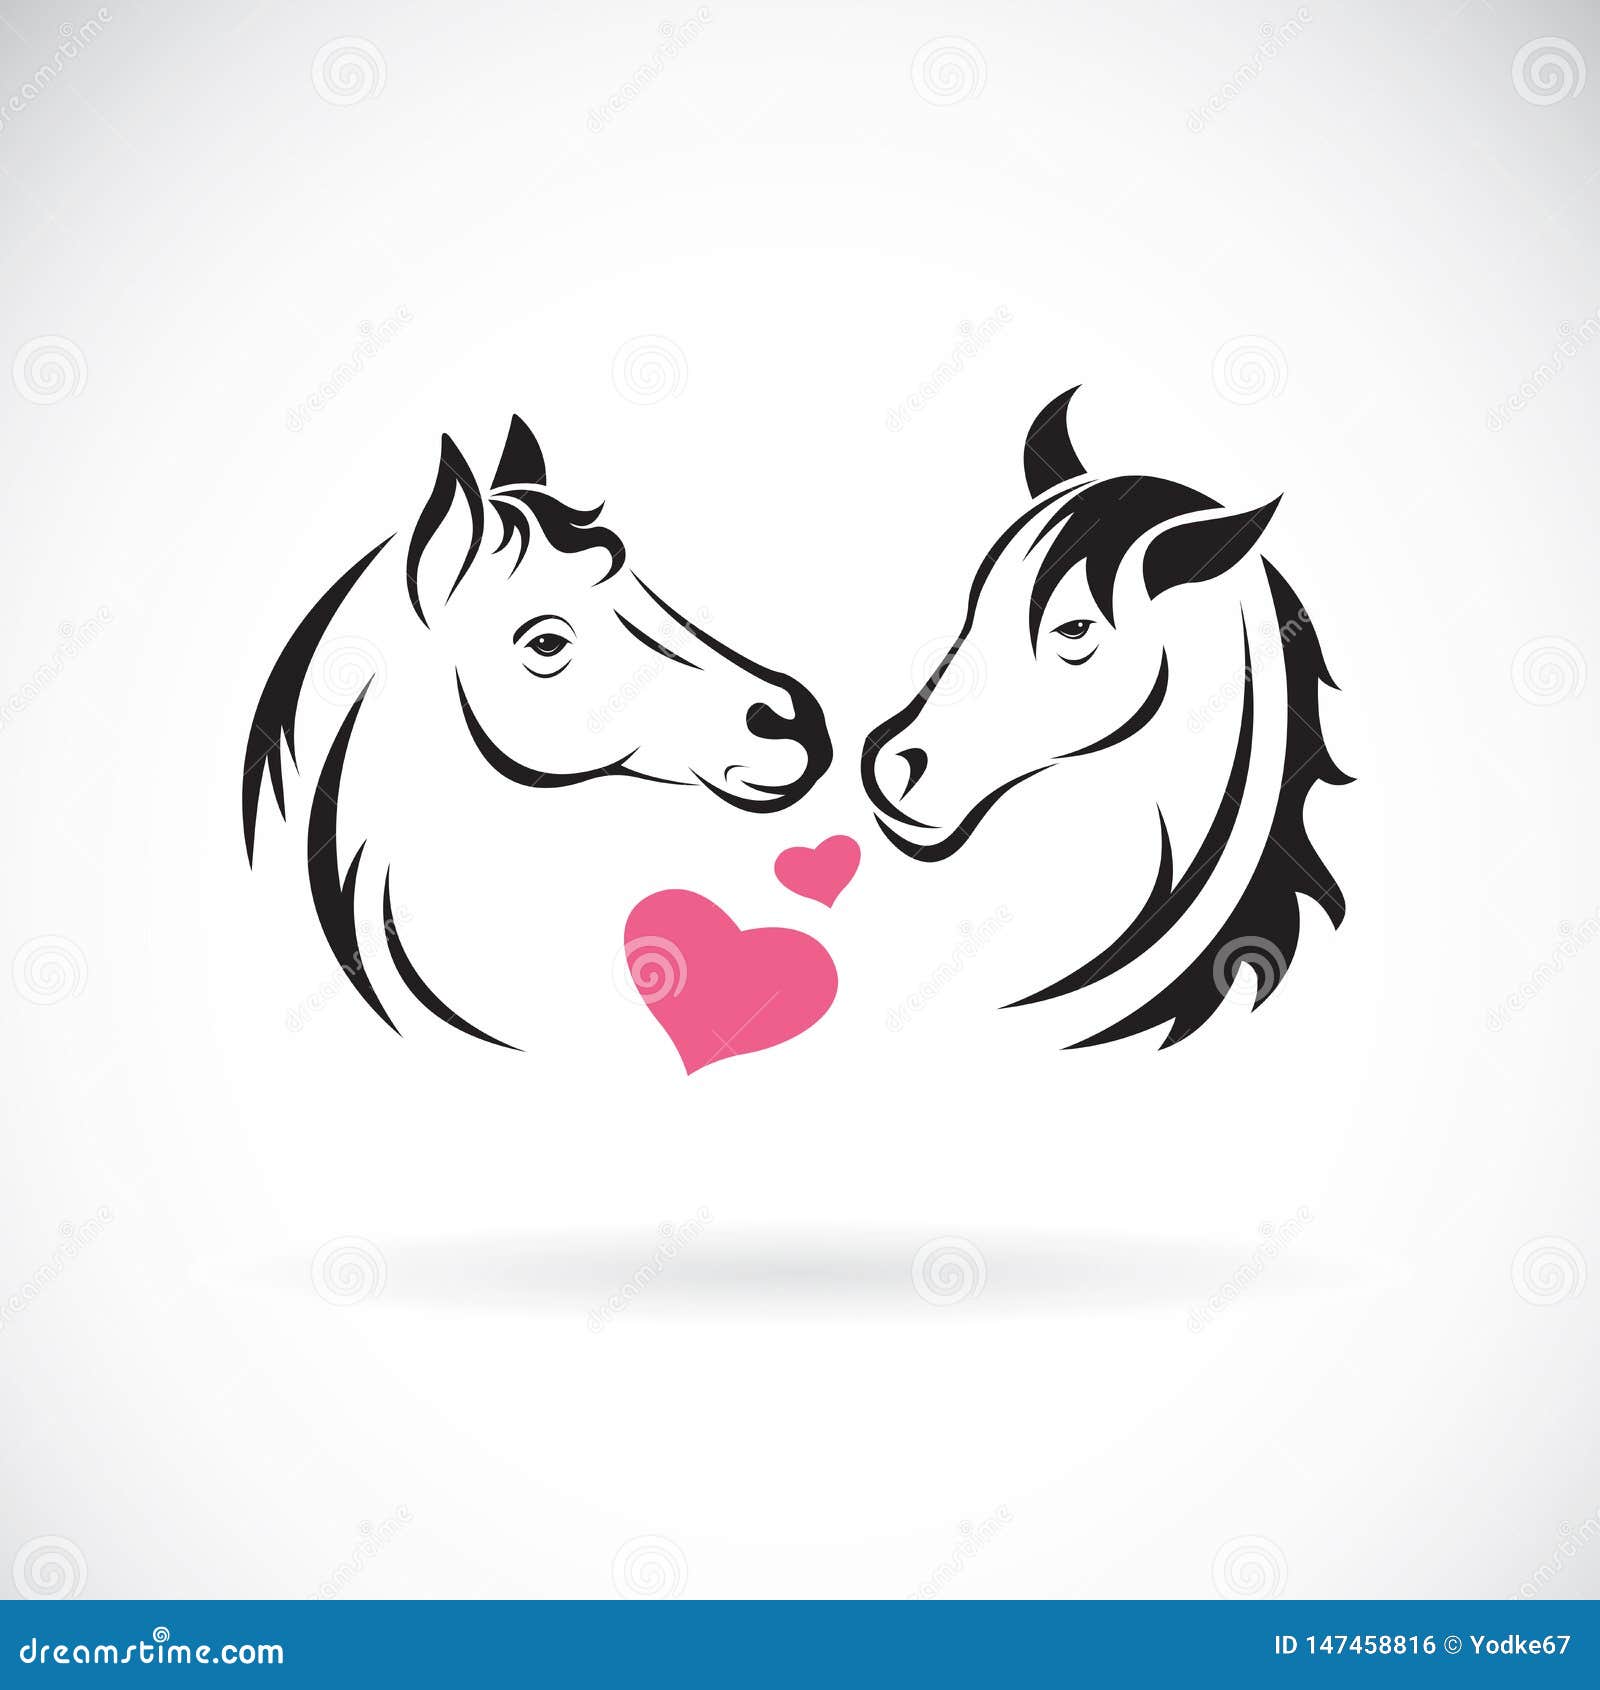 Vector of Two Horse and Heart on White Background. Wild Animals. Horse Logo  or Icon Stock Vector - Illustration of animal, heart: 147458816